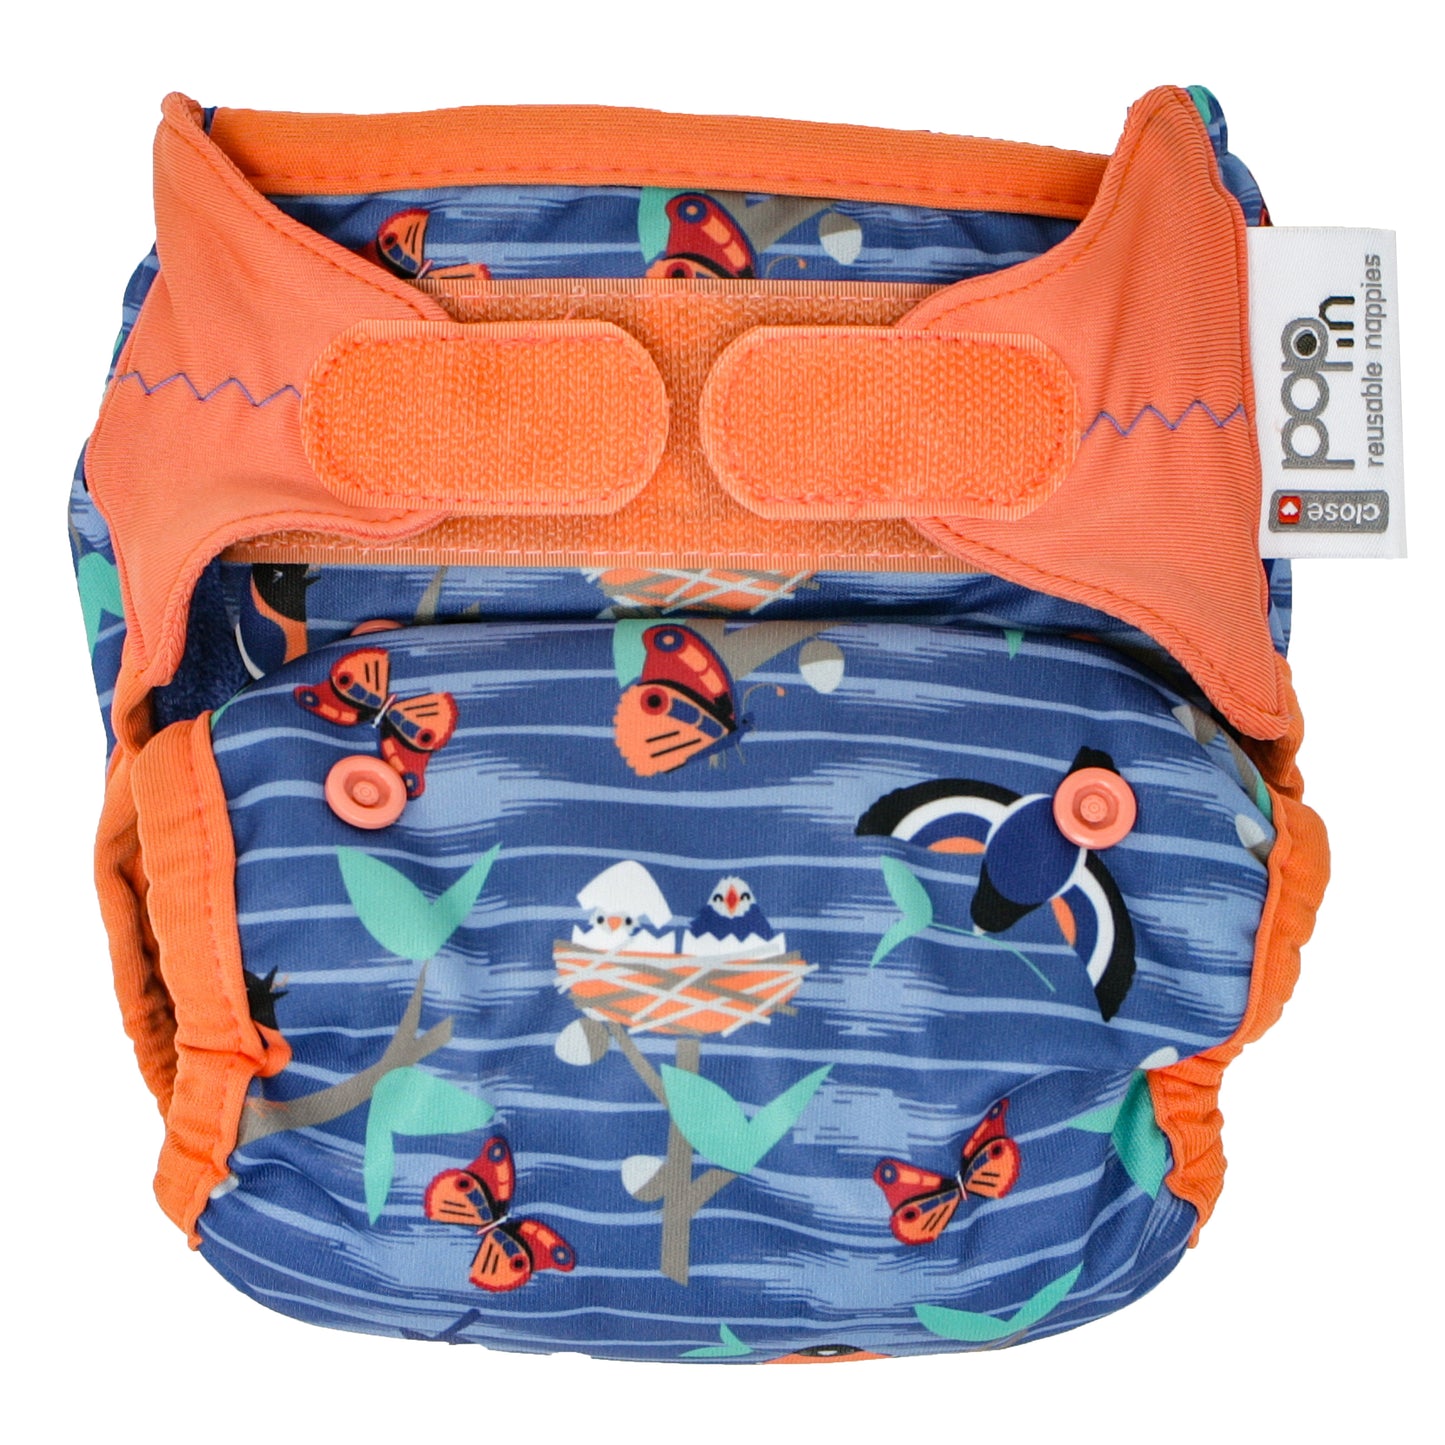 Blue Orange Pop-in One Size Twilight Garden Reusable Cloth Nappy, With Velcro Fastening